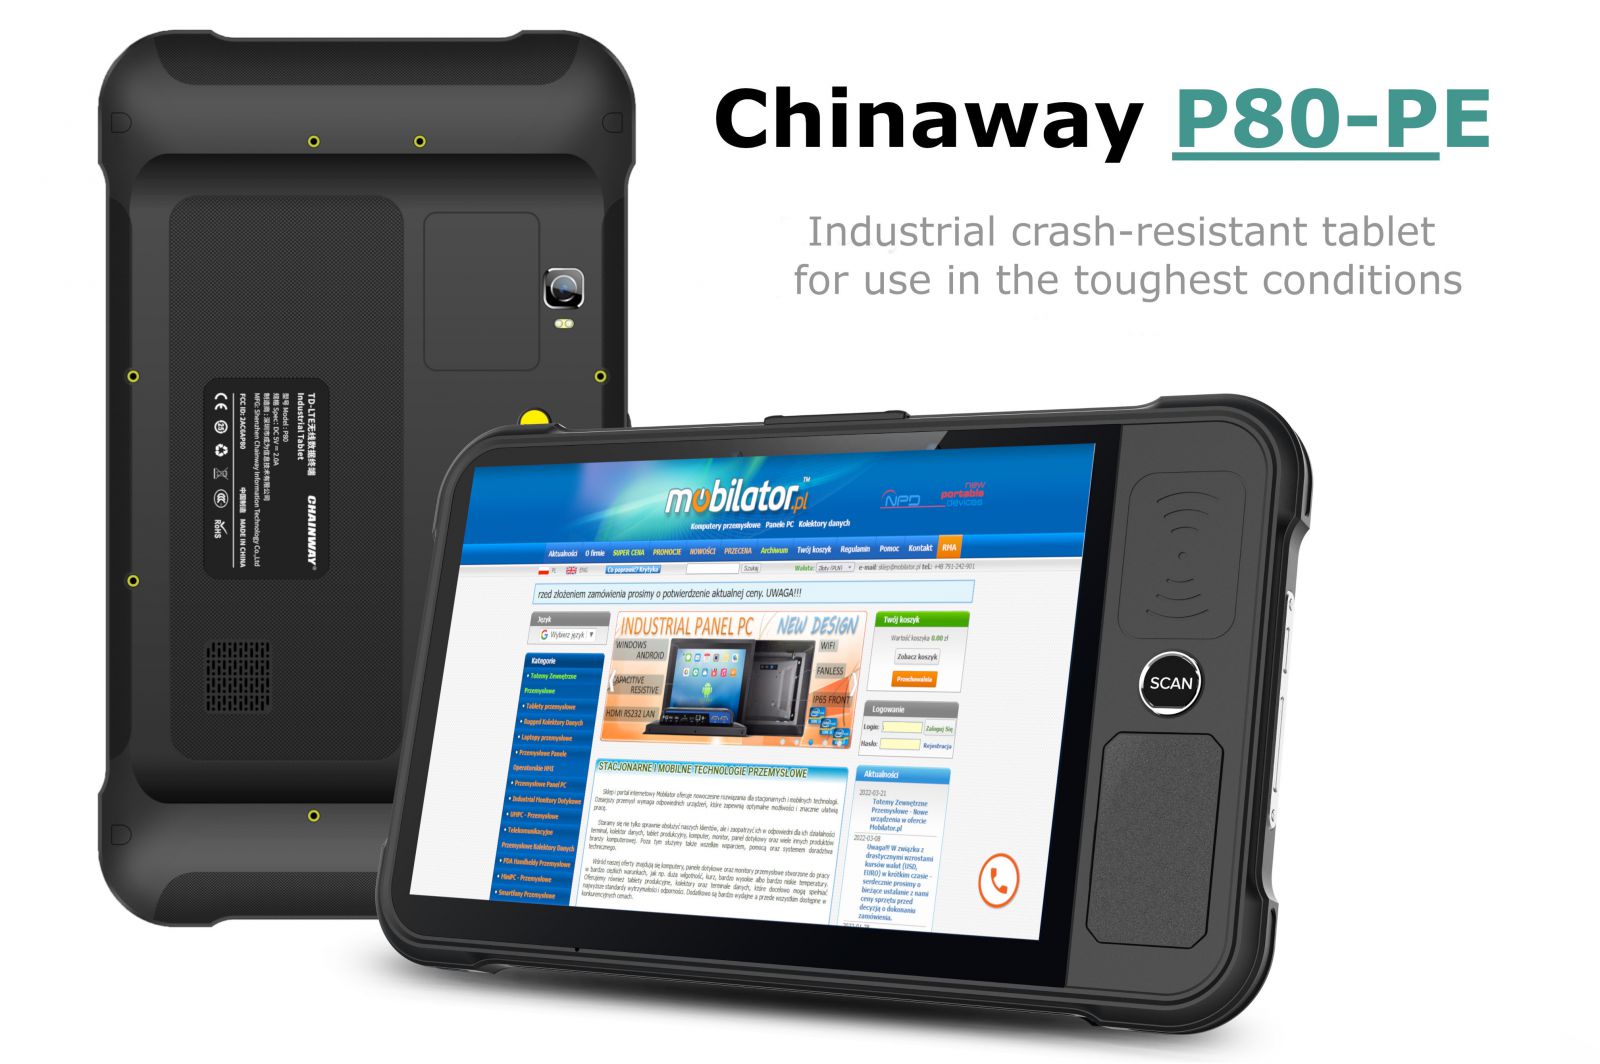 Chainway P80-PE v. 4- Versatile tablet with UHF RFID code reader on the back with 15m action range, NFC, Qualcomm processor